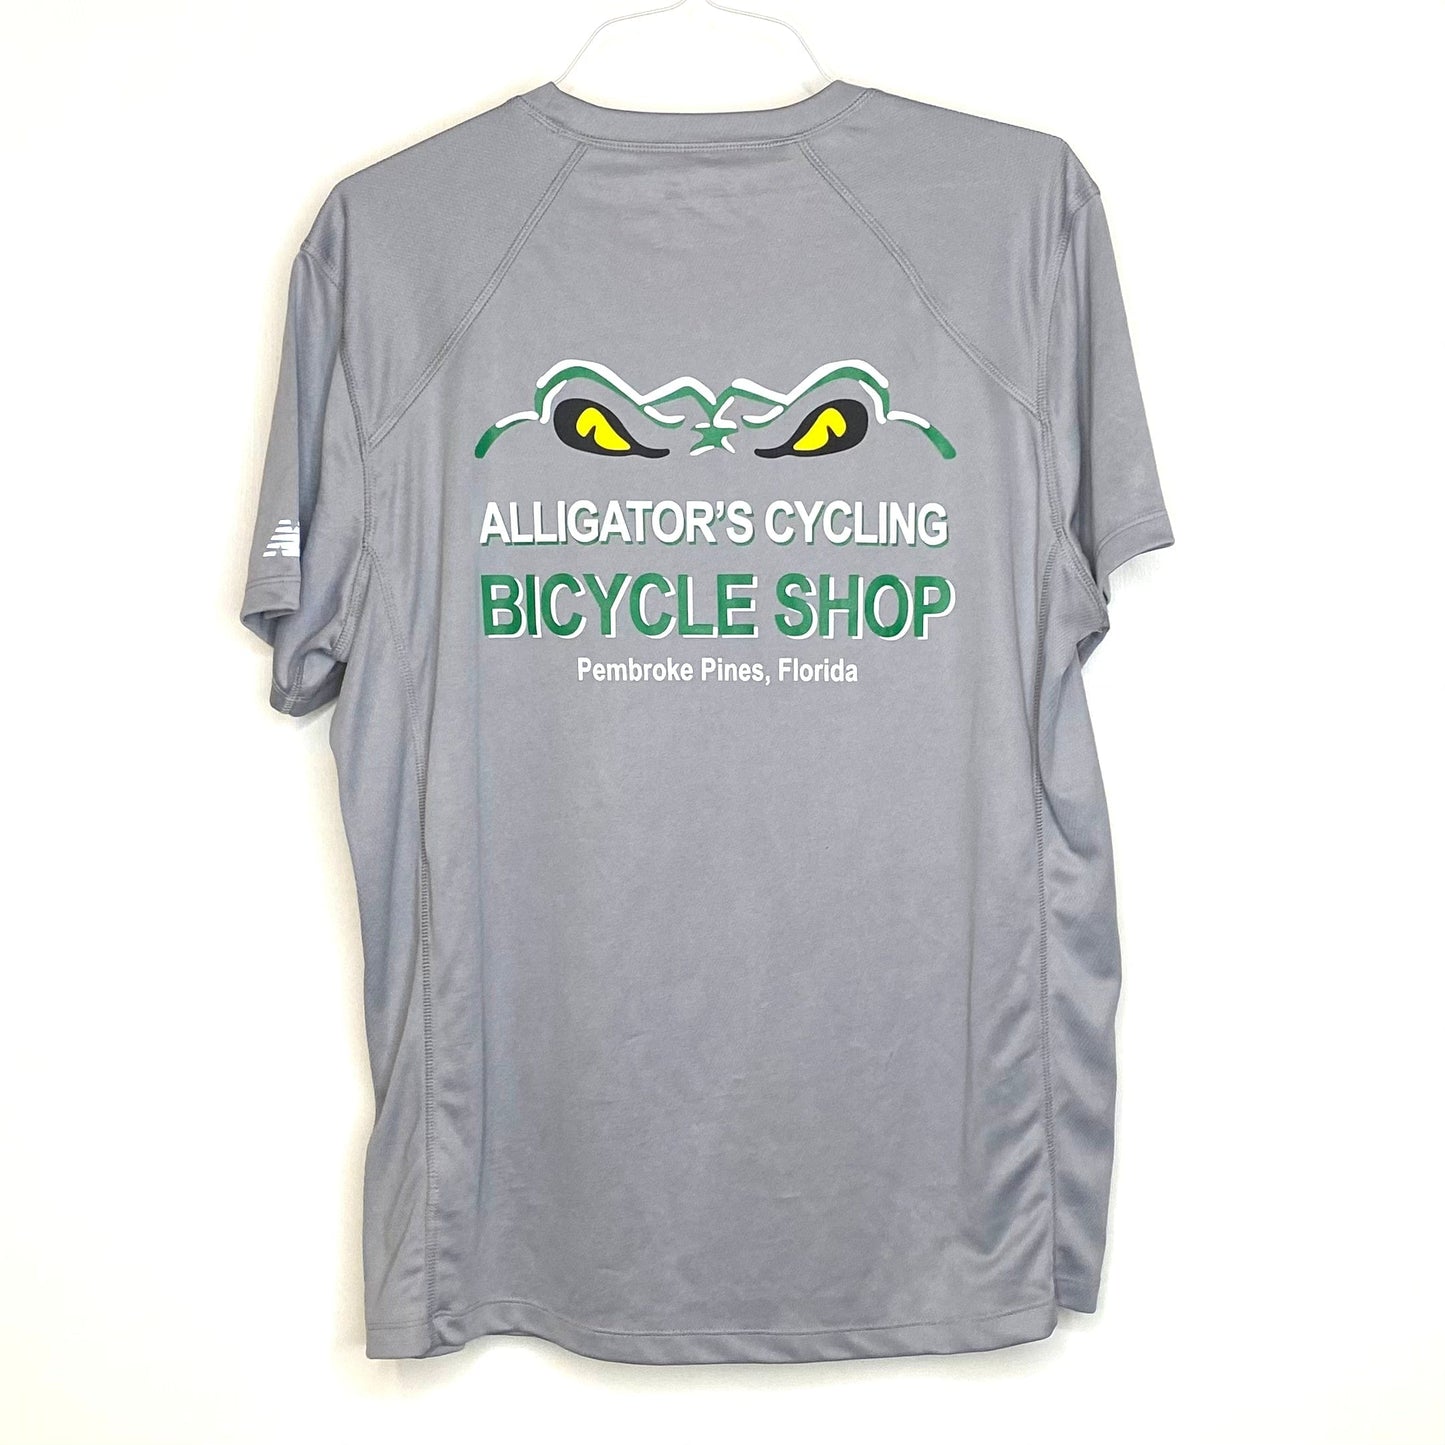 NEW BALANCE Mens Size XL Gray ALLIGATOR'S CYCLING BICYCLE SHOP T-Shirt S/s